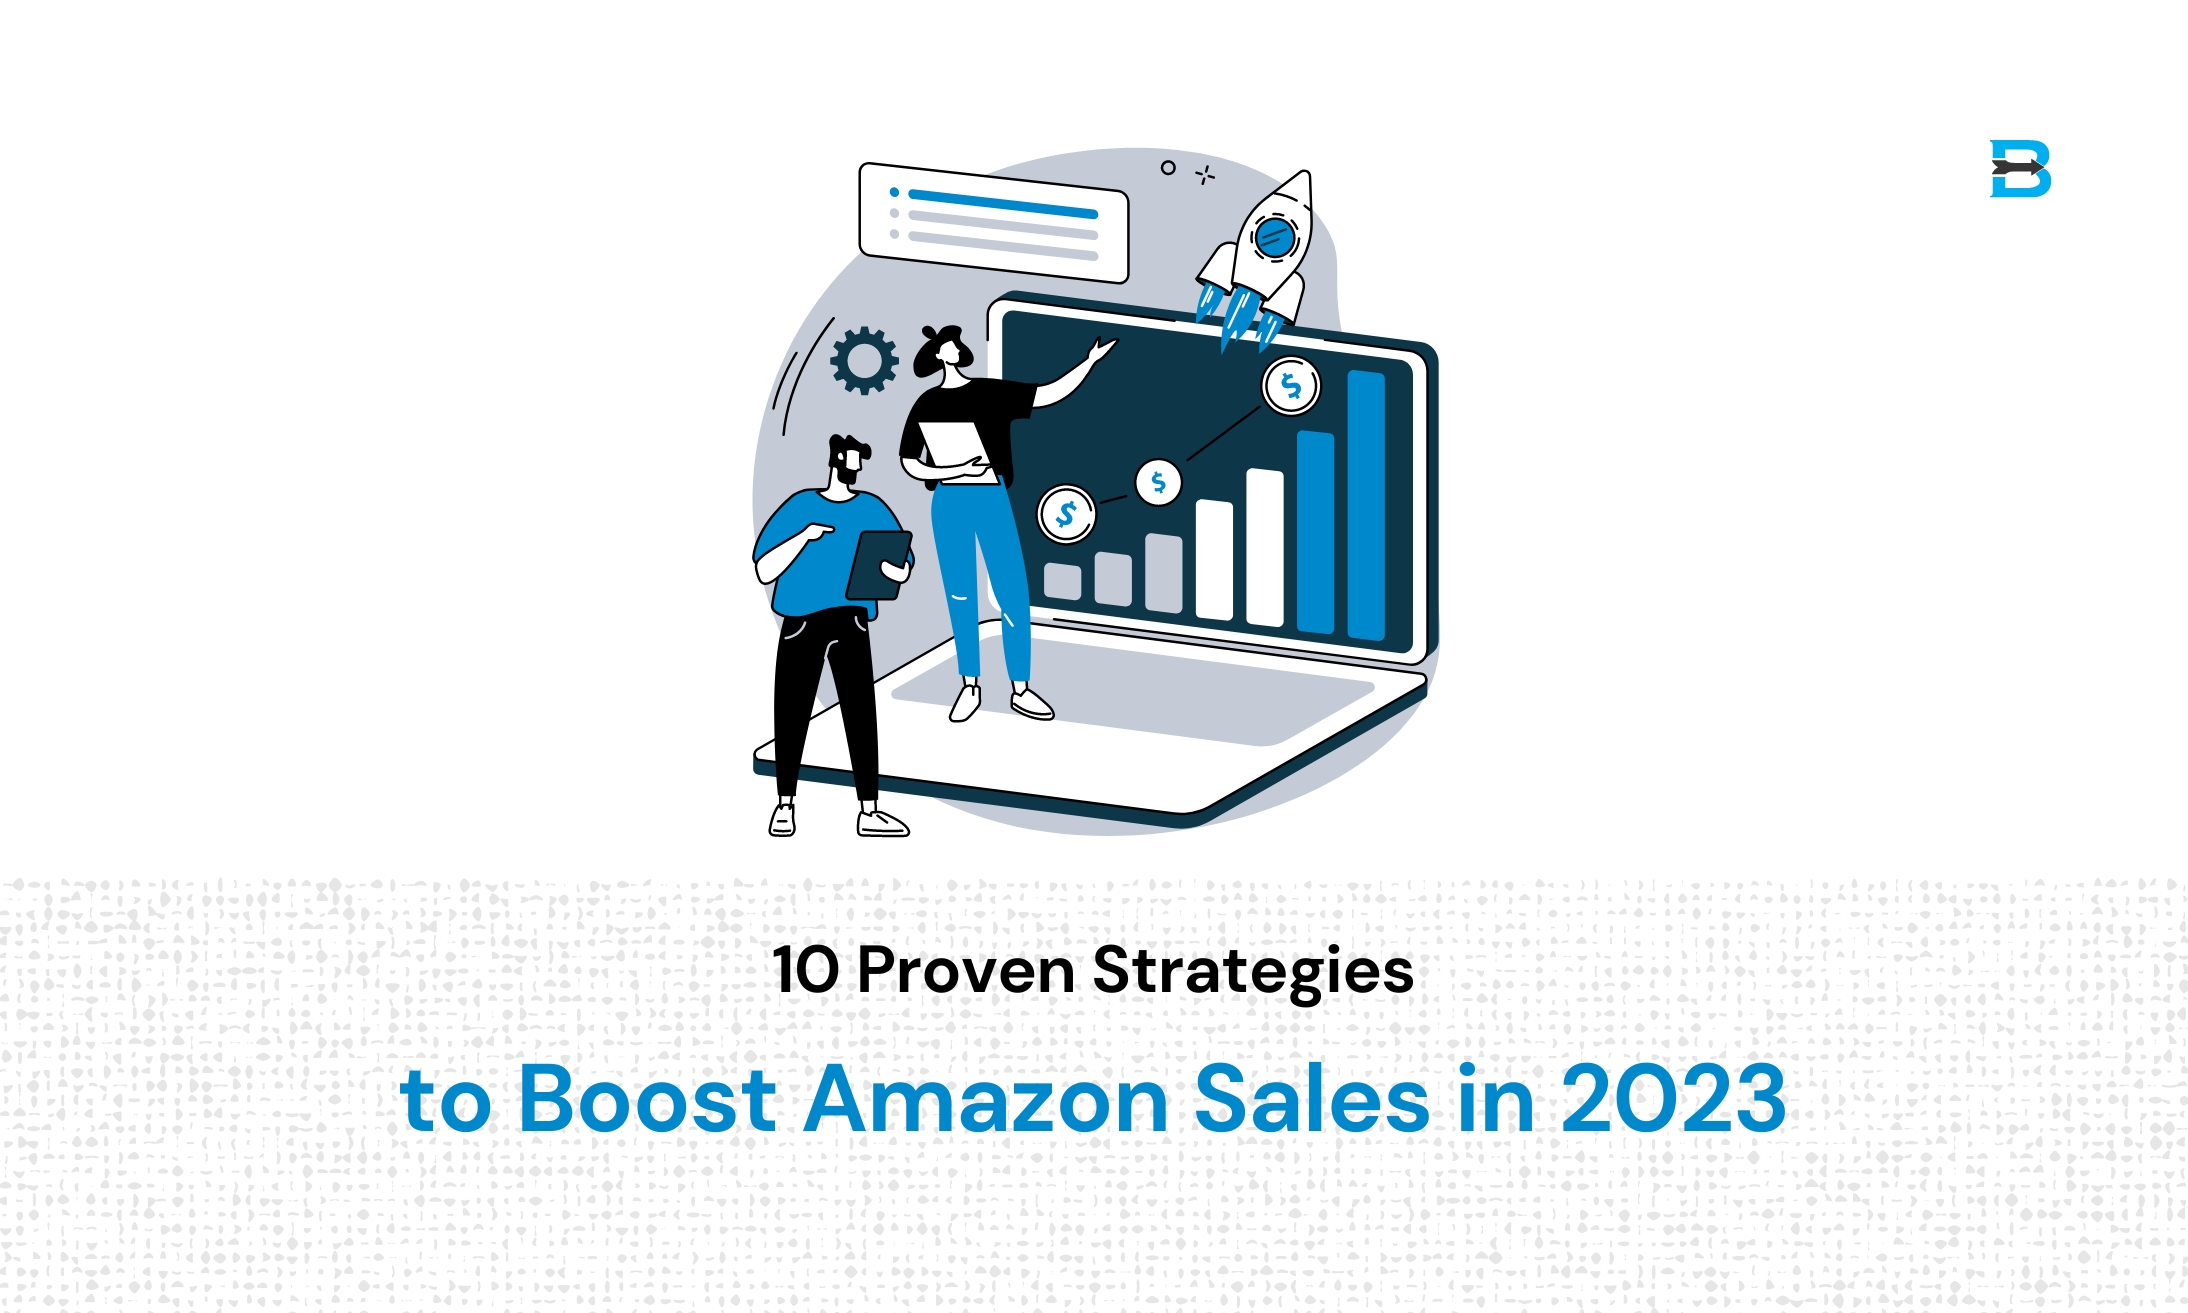 10 Proven Strategies to Boost Amazon Sales in 2023